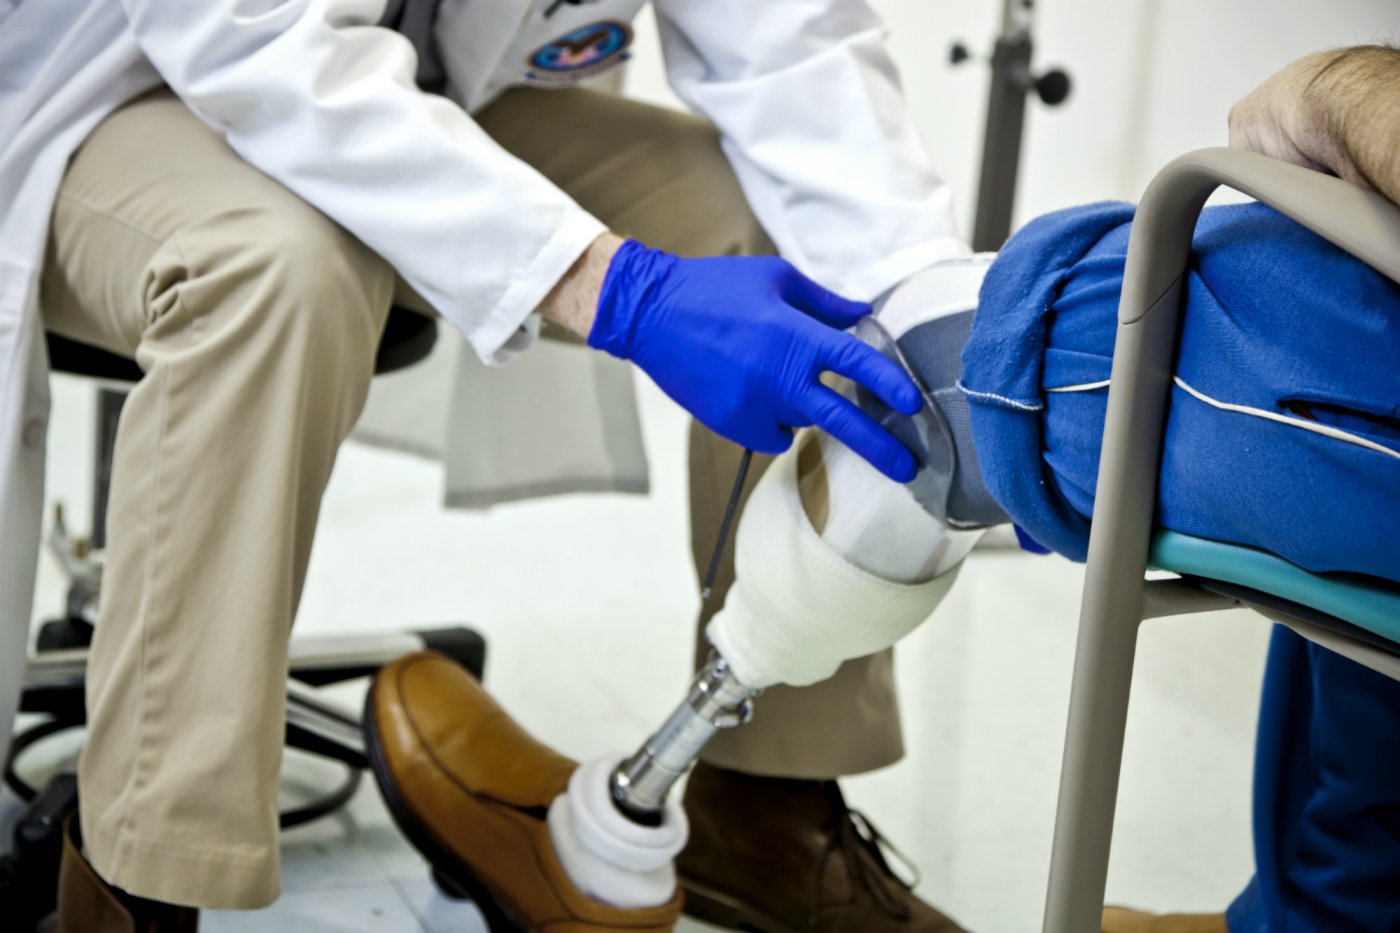 Prosthetics at VHA: Helping amputee Veterans with the latest in technology